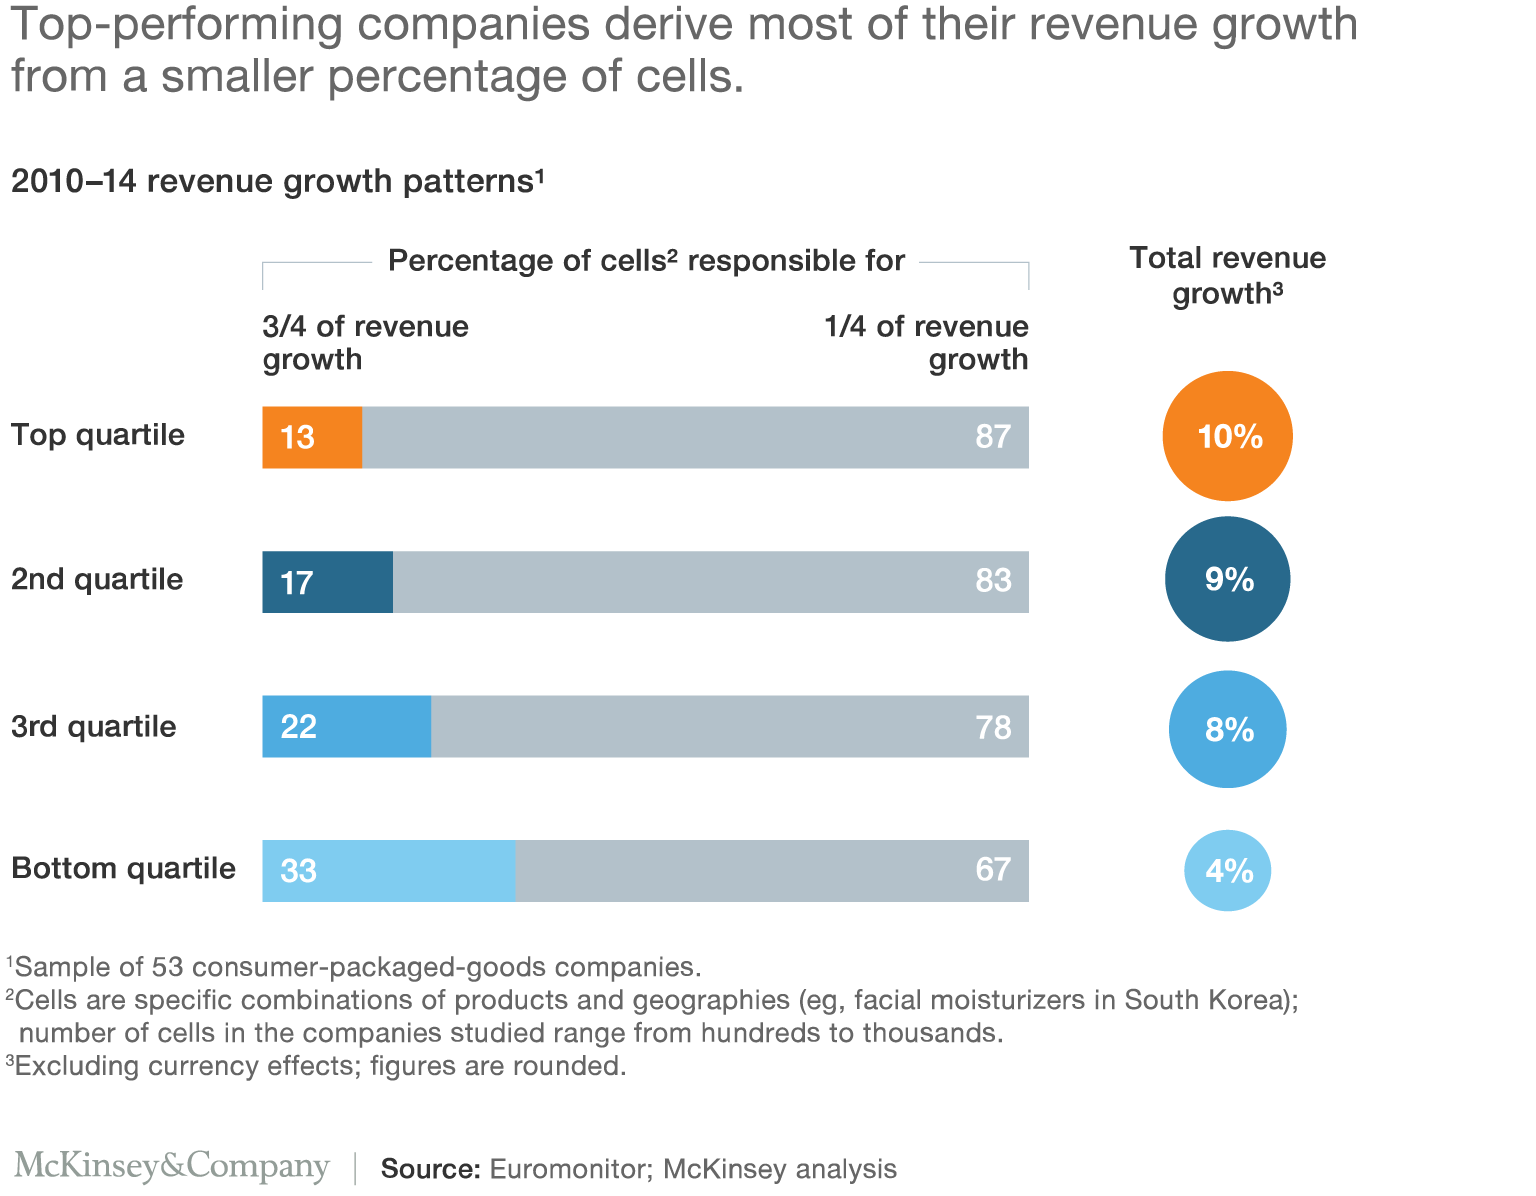 Top-performing companies derive most of their revenue growth from a smaller percentage of cells.